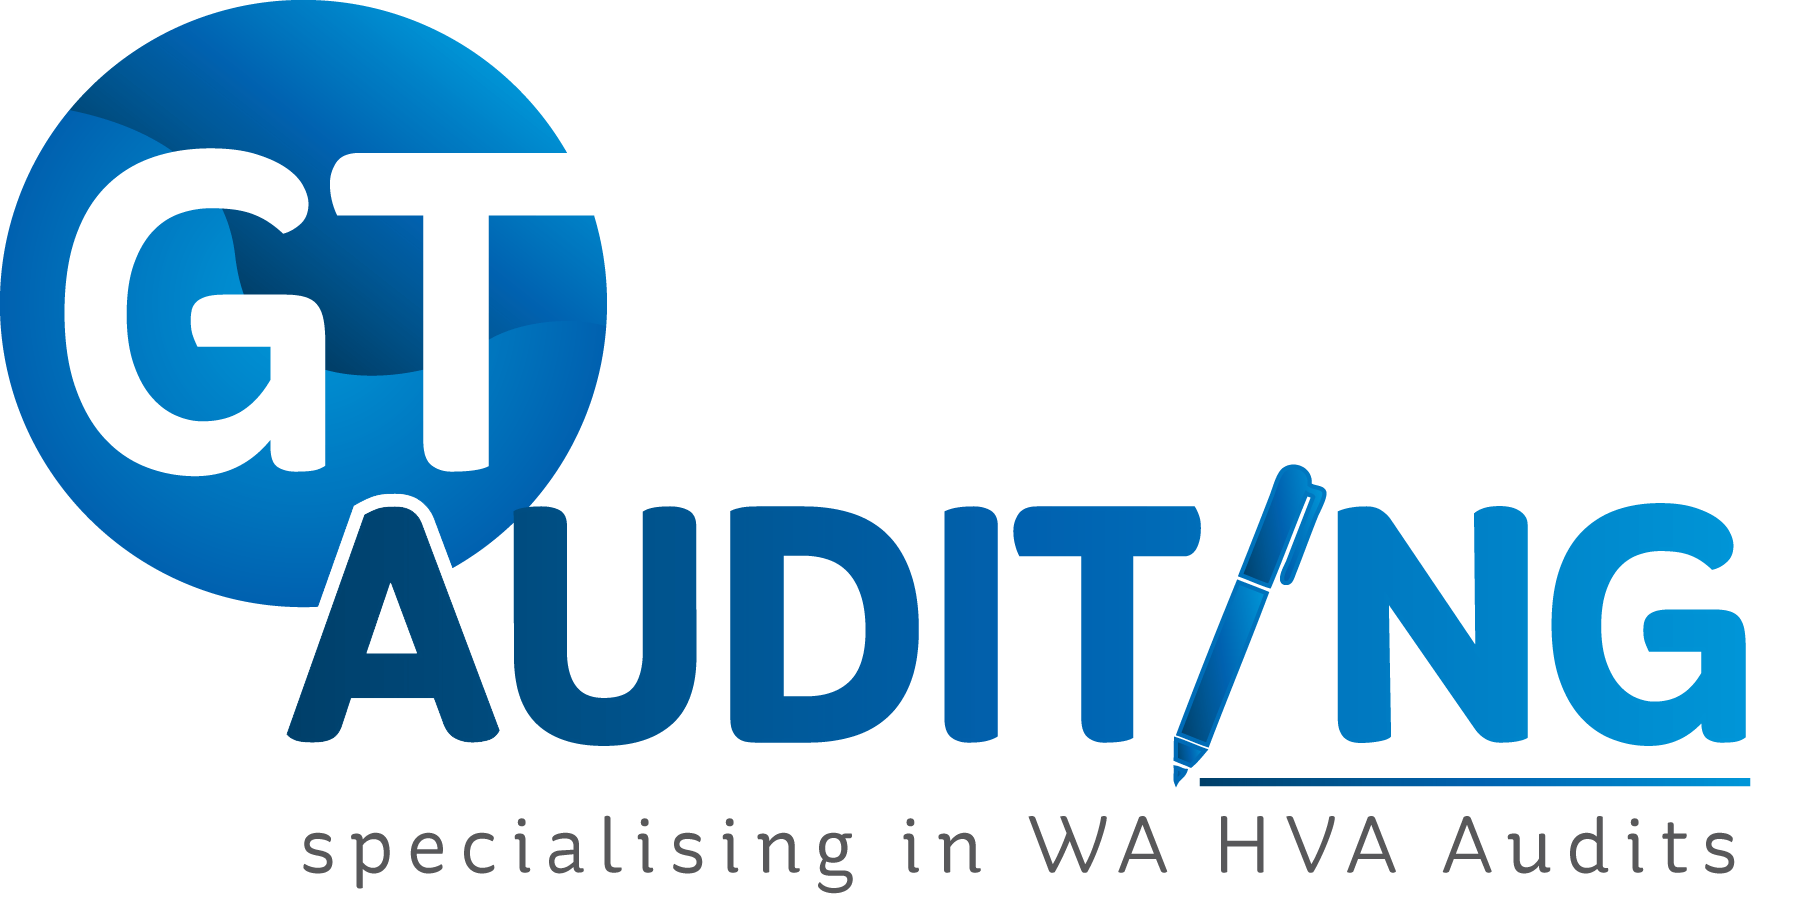 Auditing Logo - GT Auditing | At GT Auditing Services we pride ourselves on ...